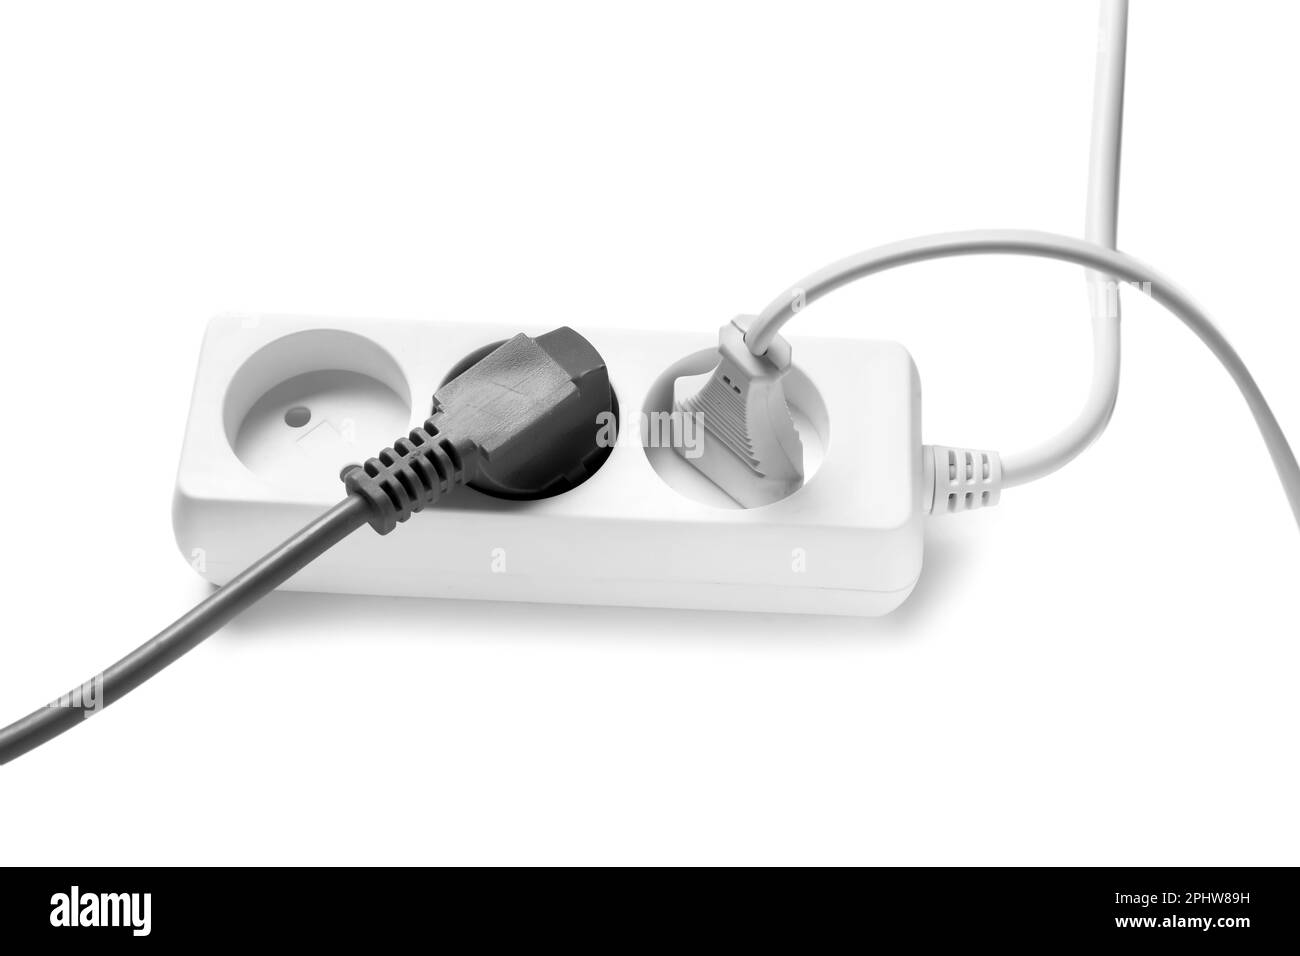 Electric extension cord with plugs isolated on white background Stock Photo